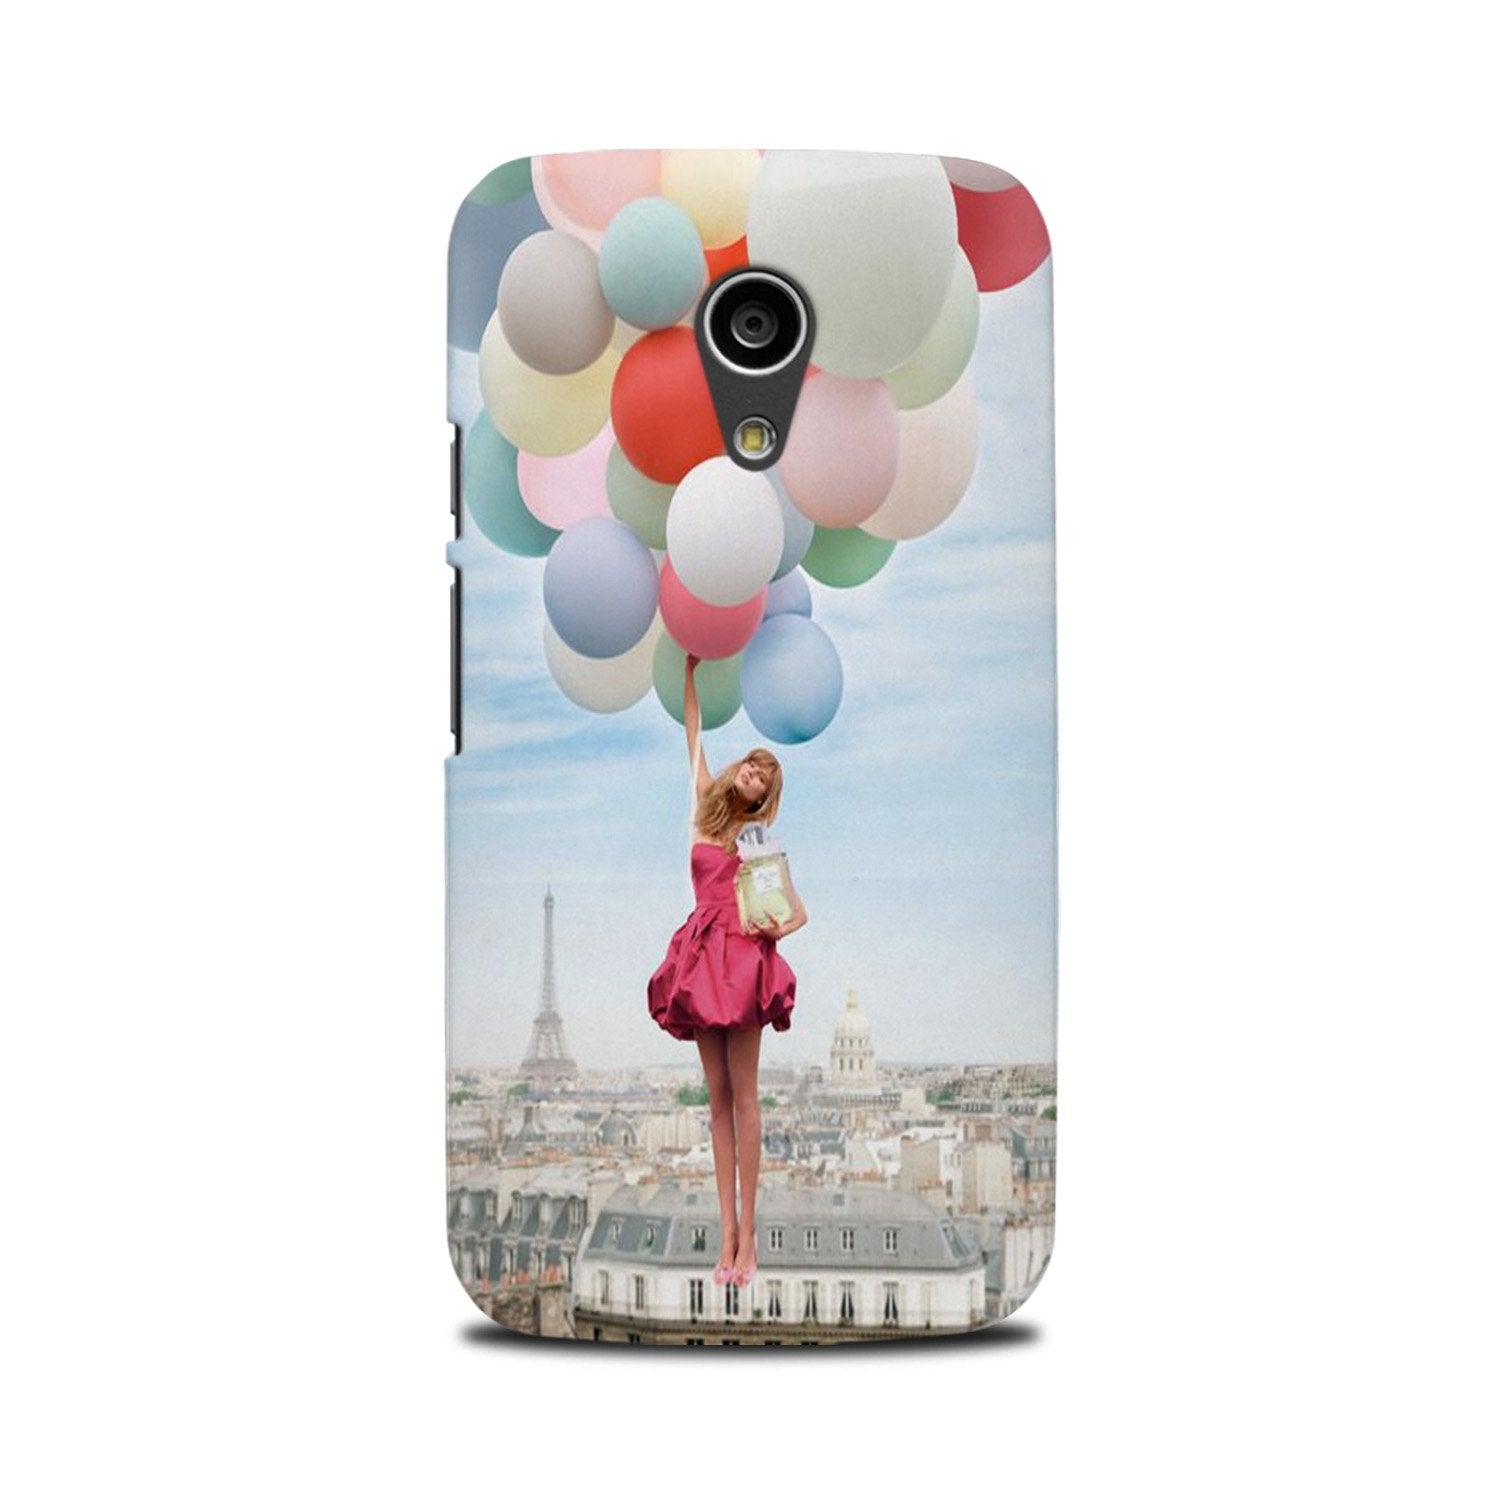 Girl with Baloon Case for Moto G2